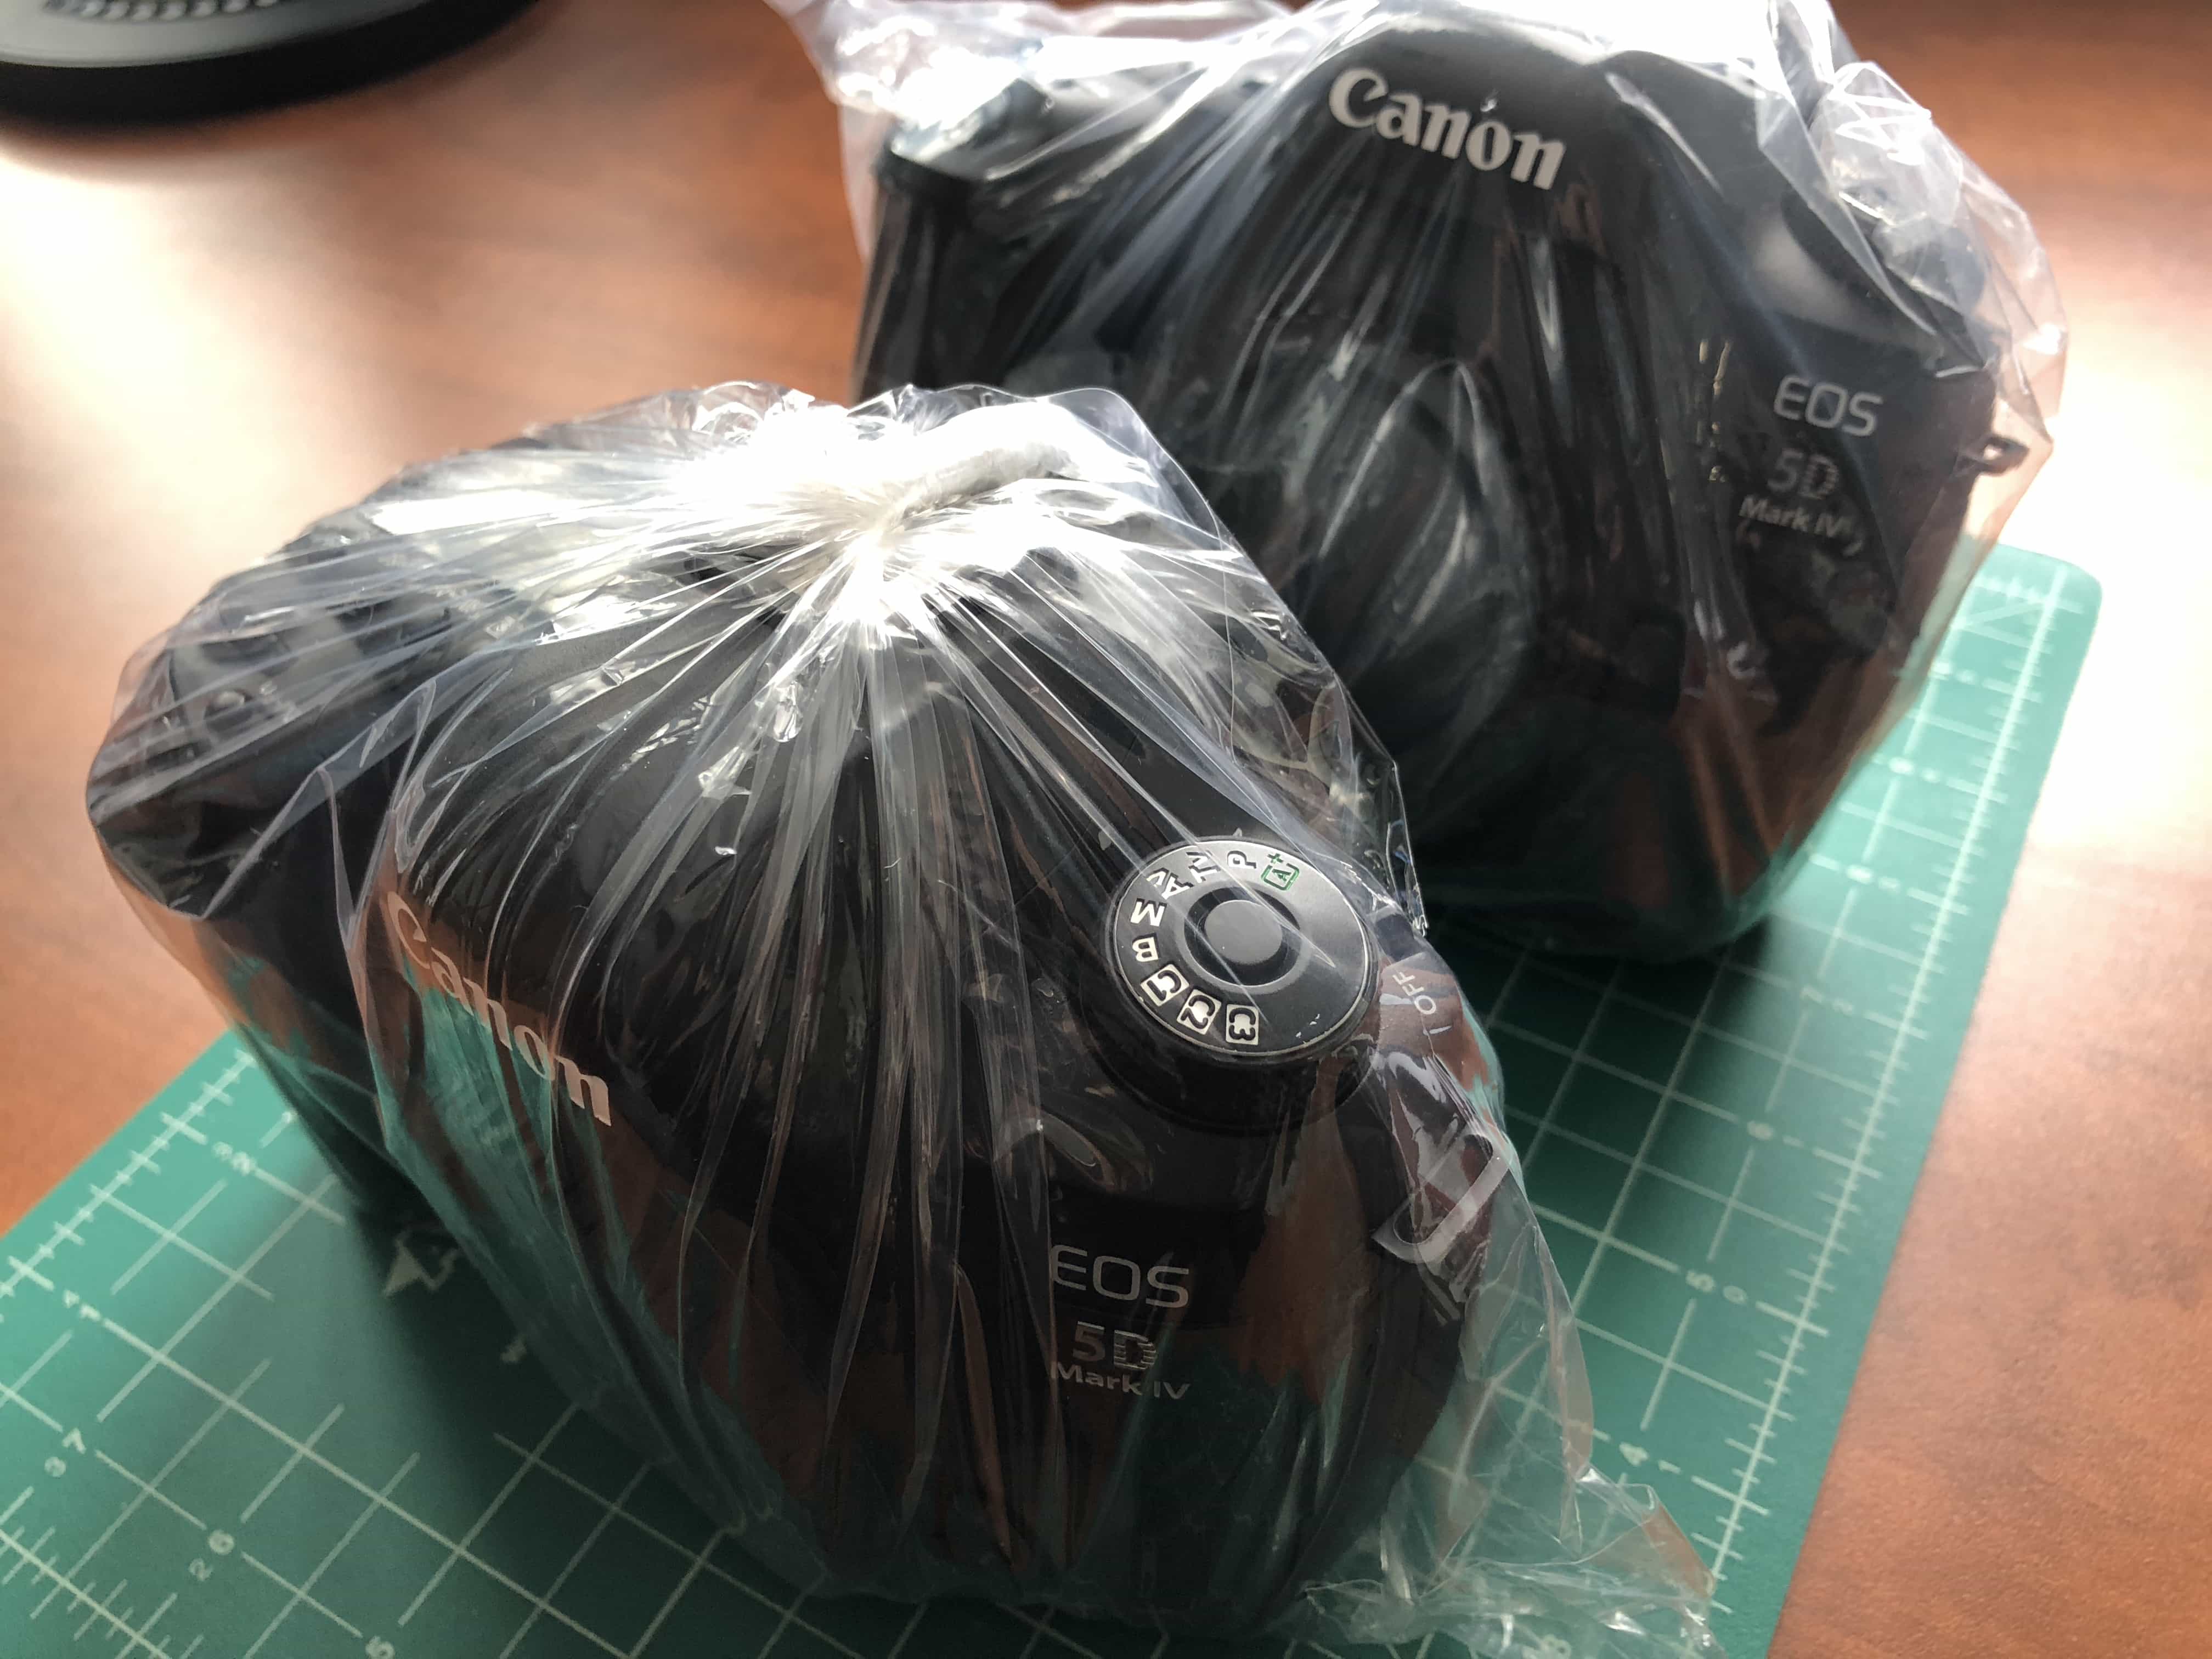 Canon camera gear packed by Canon CPS